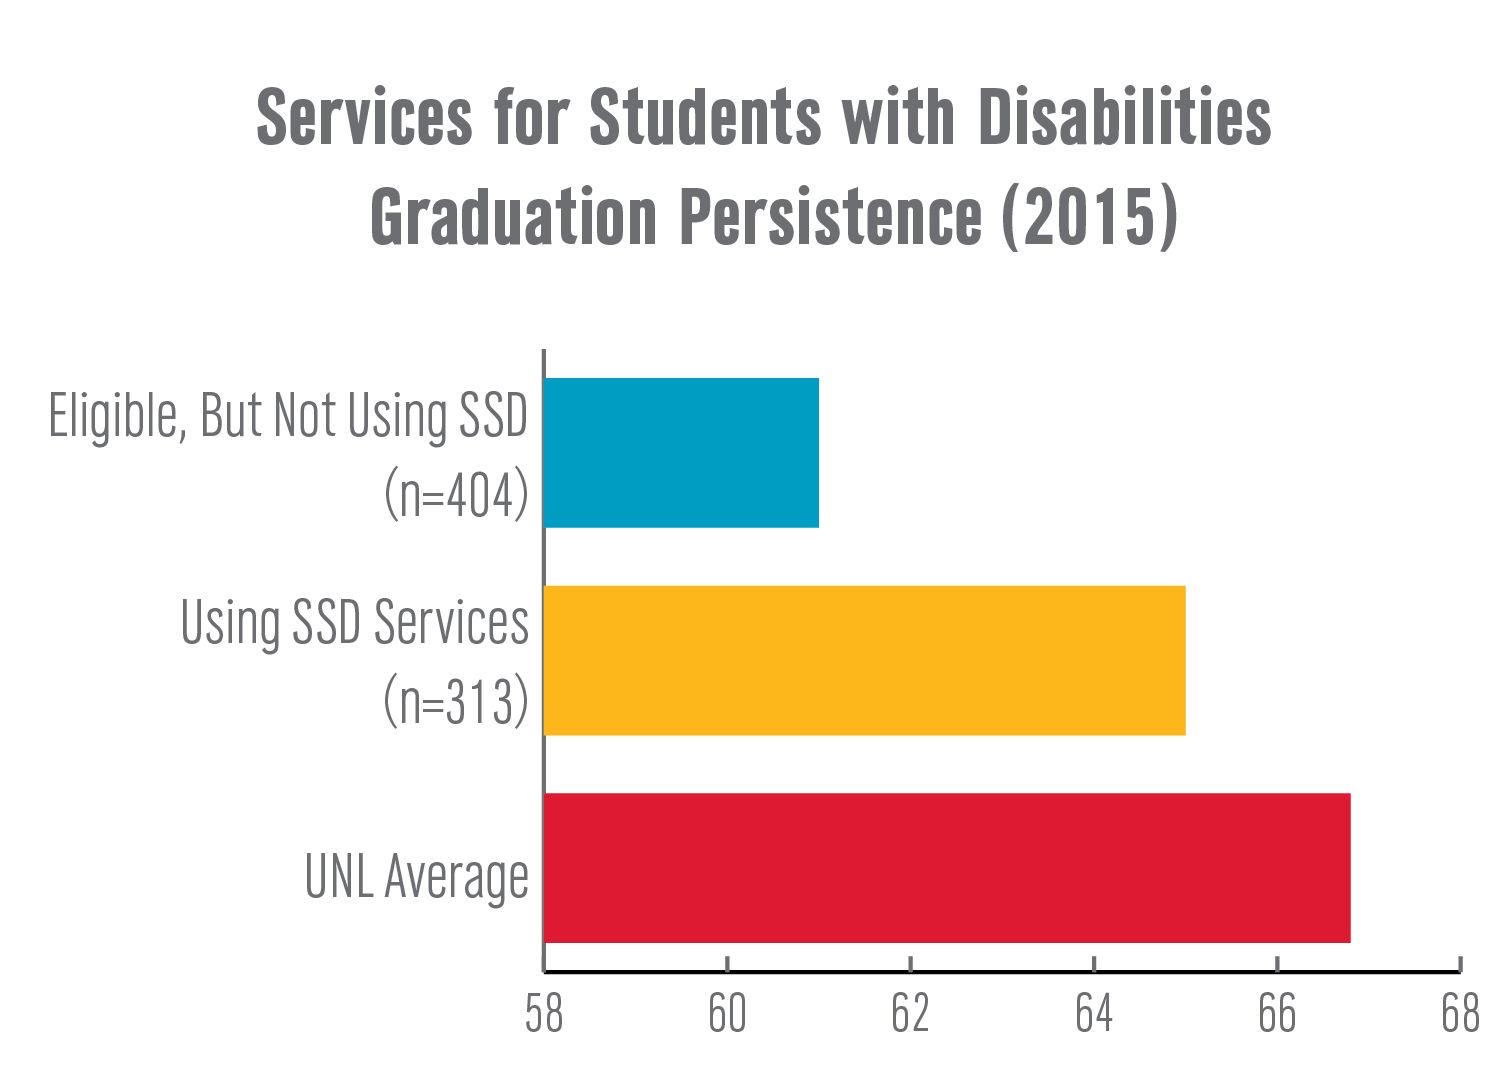 Chart: Services for Students with Disabilities Graduation Persistence (2015)